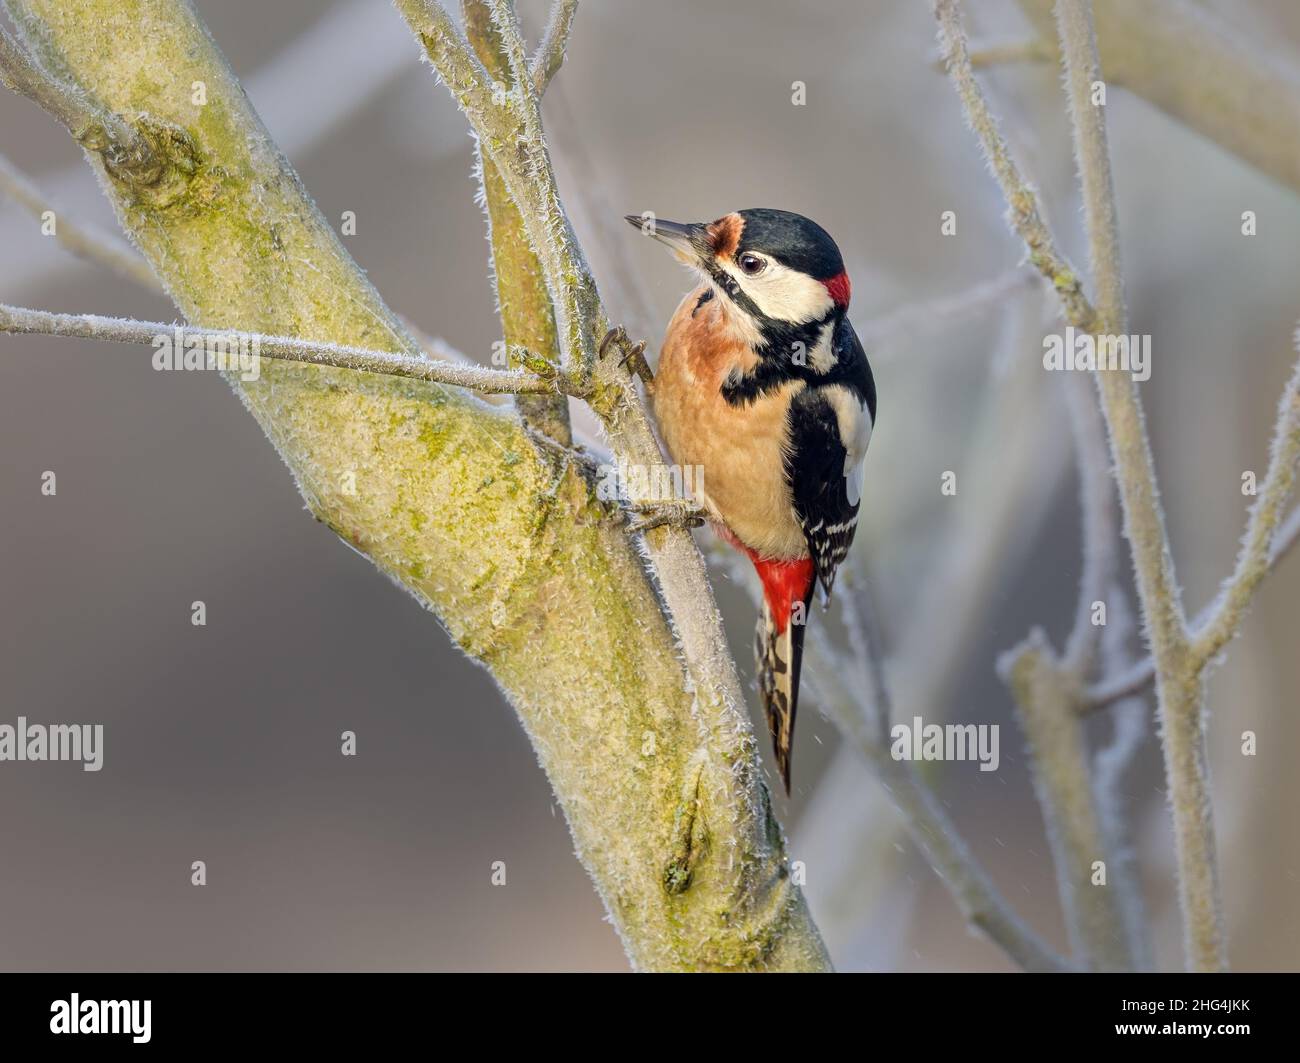 Great spotted woodpecker, Dendrocopos major, male with red markings on its neck perched on a branch on a cold winter day, Rhineland, Germany Stock Photo